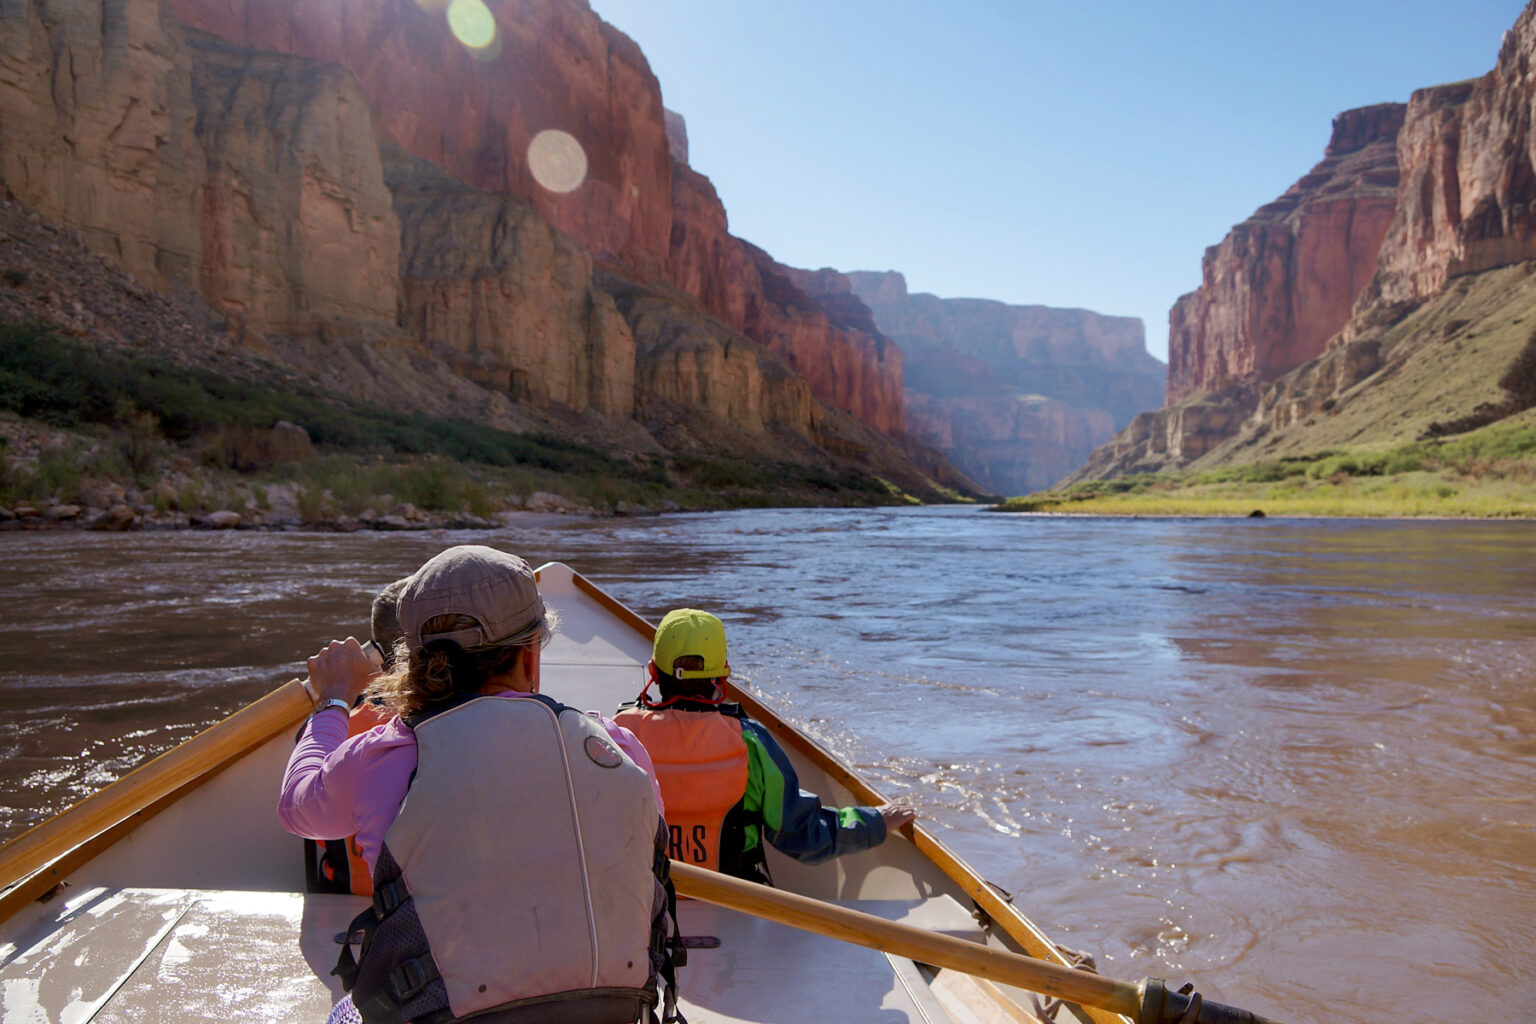 A scenic shot of Grand Canyon from the point of view of a guest in the back of a dory on the Coloardo River